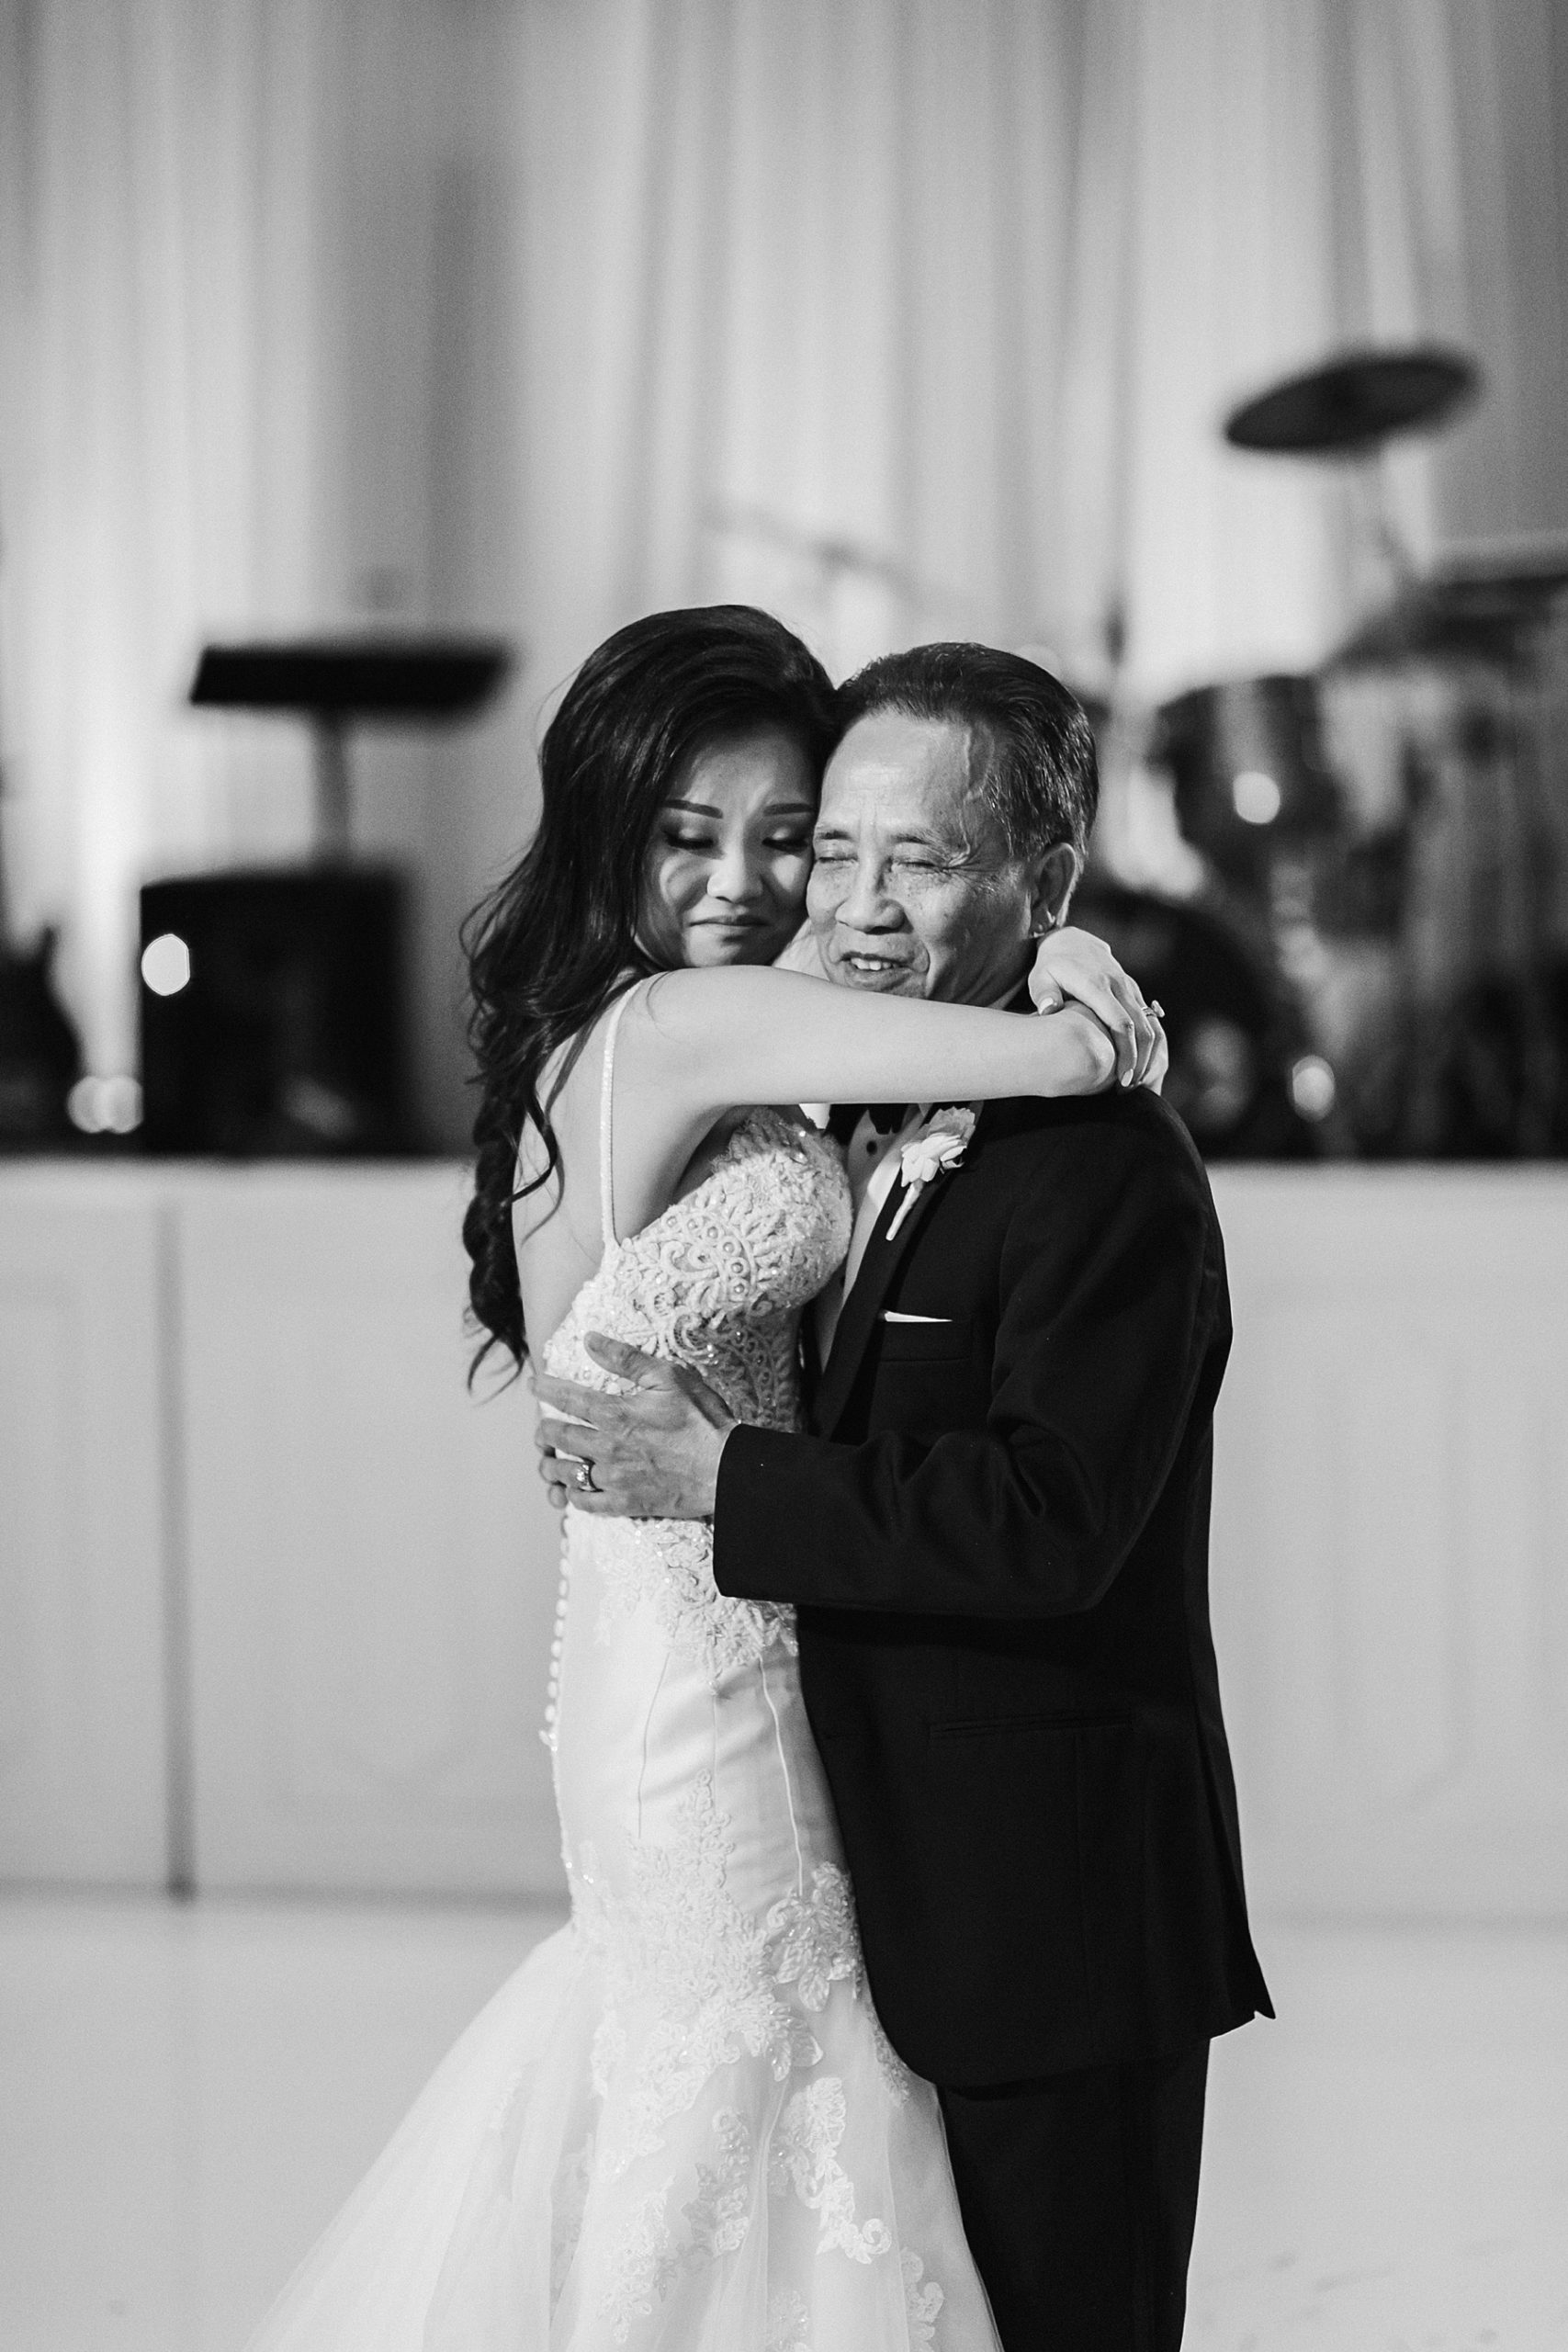 Loving embrace between the bride and her father at the Four Seasons Hotel